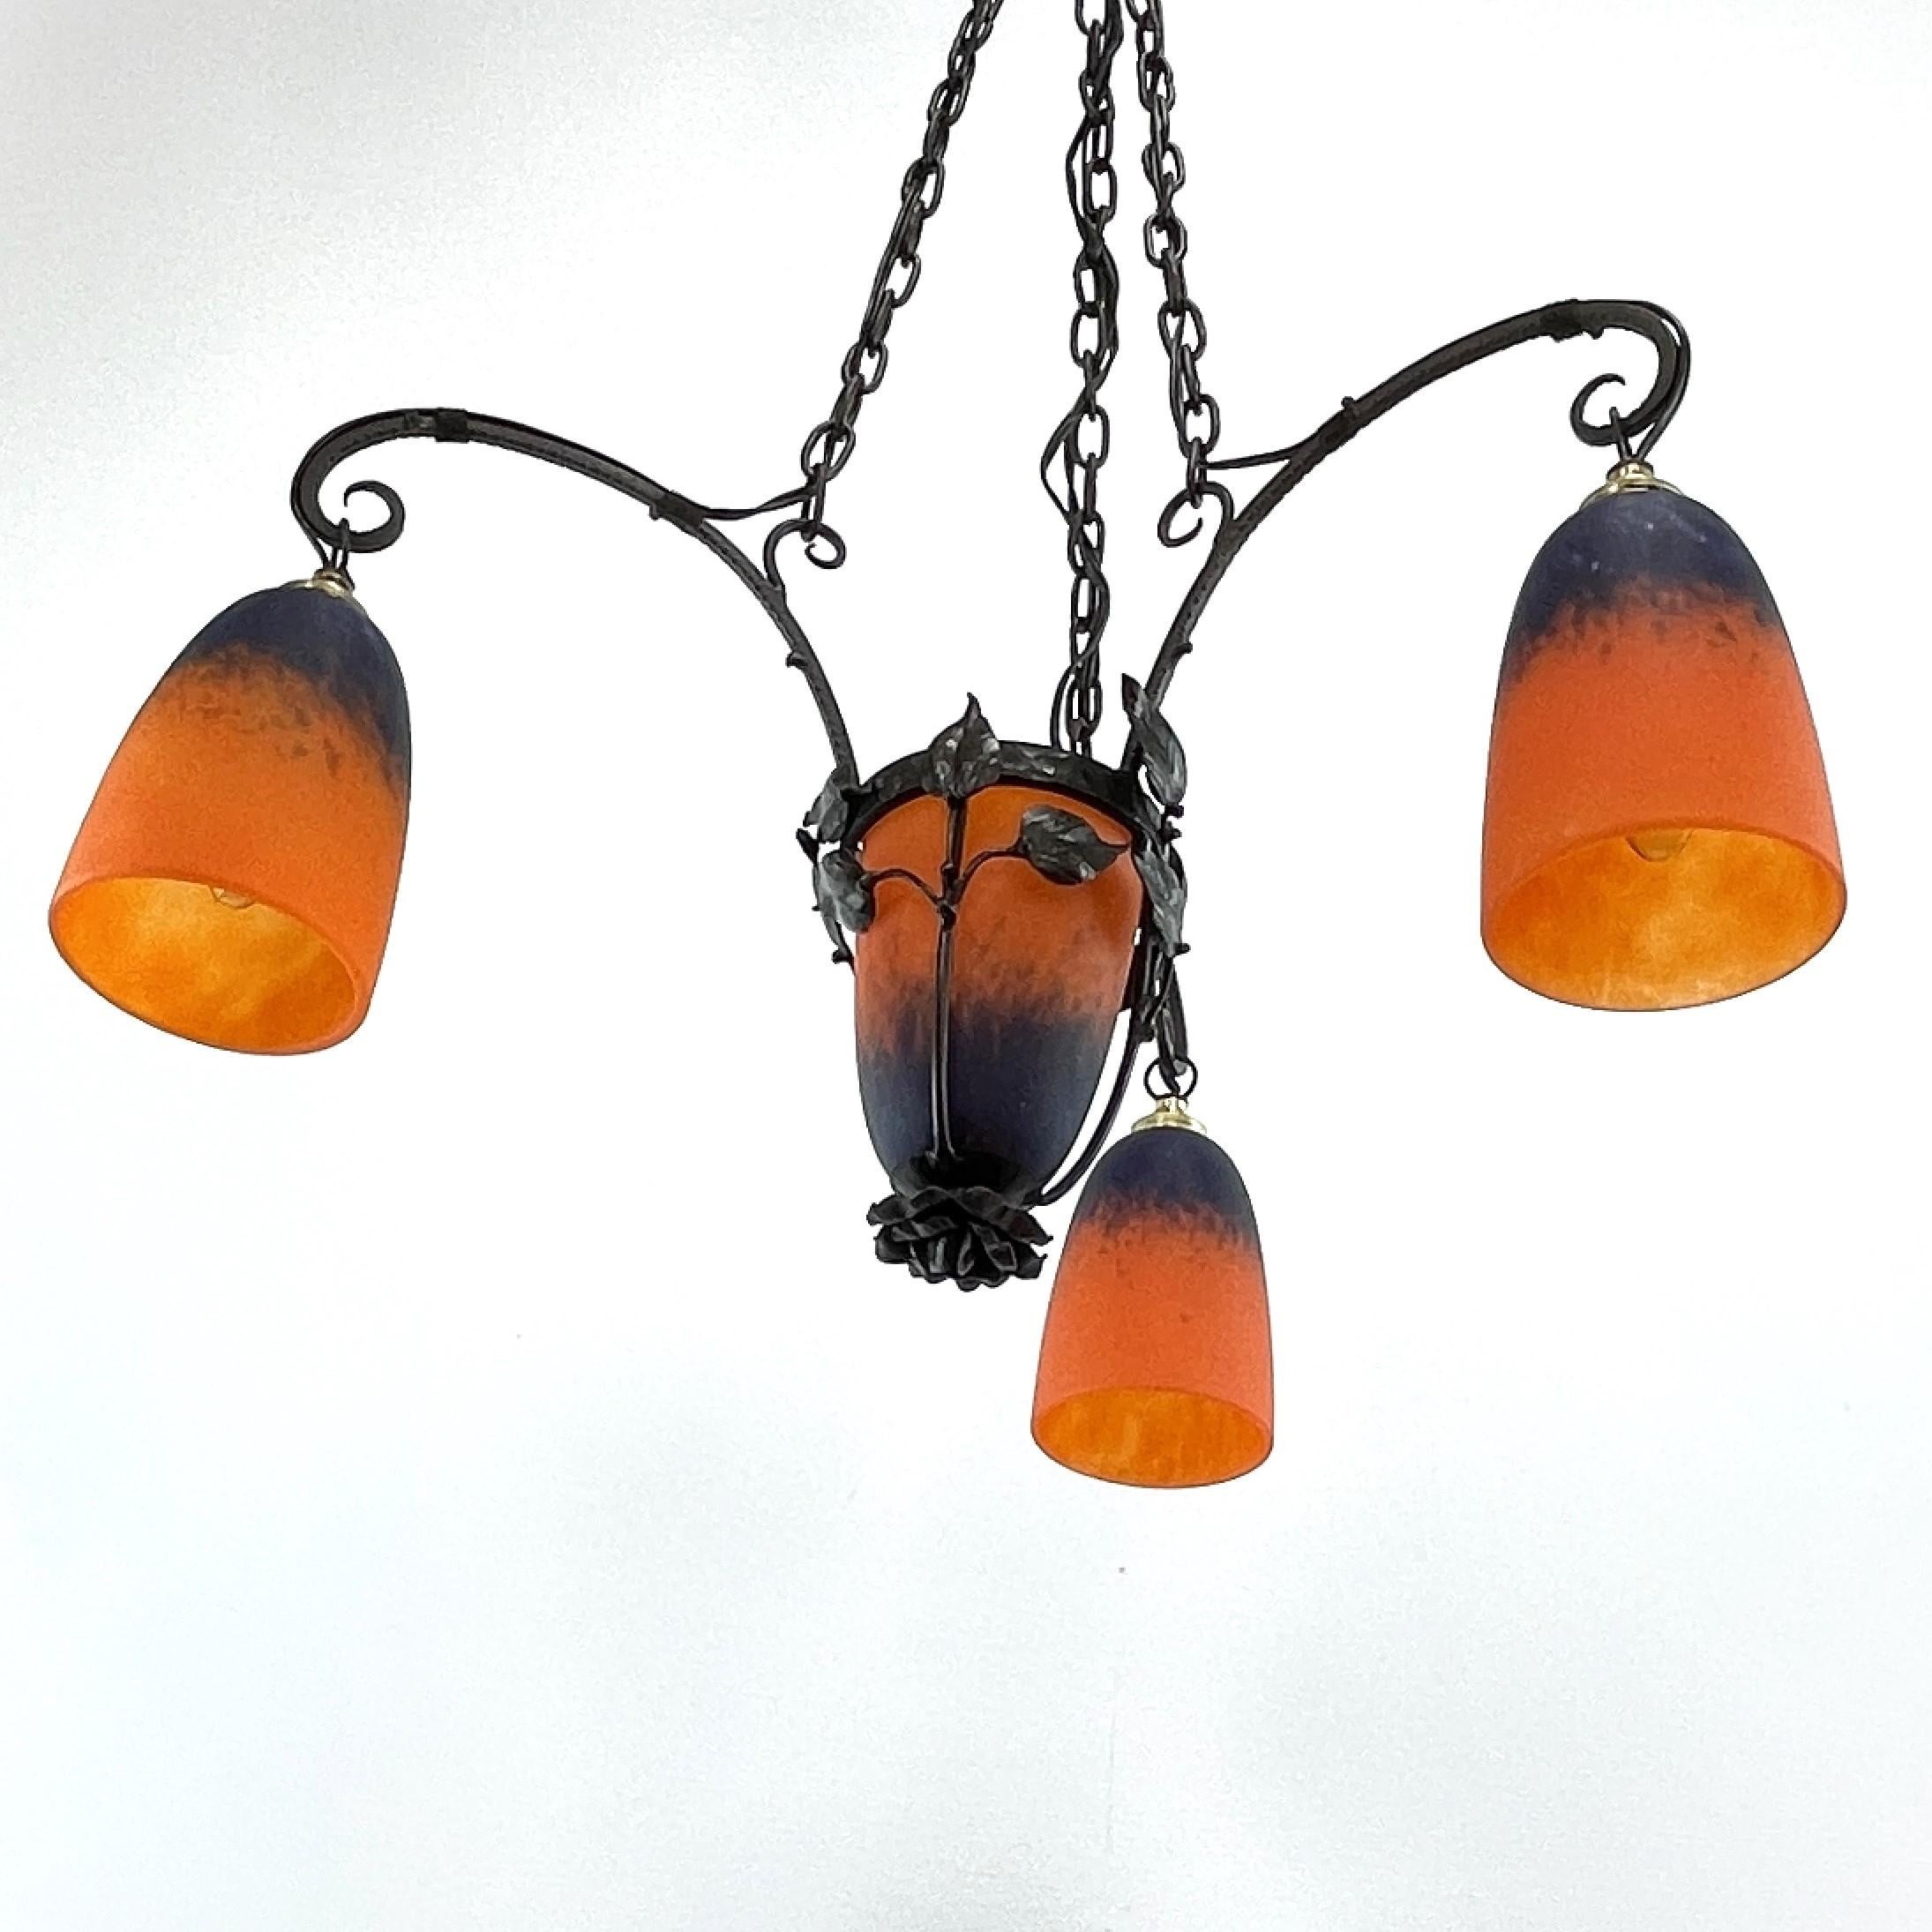 French Art Deco Pate De Verre Ceiling Lamp by Schneider France, 1930s For Sale